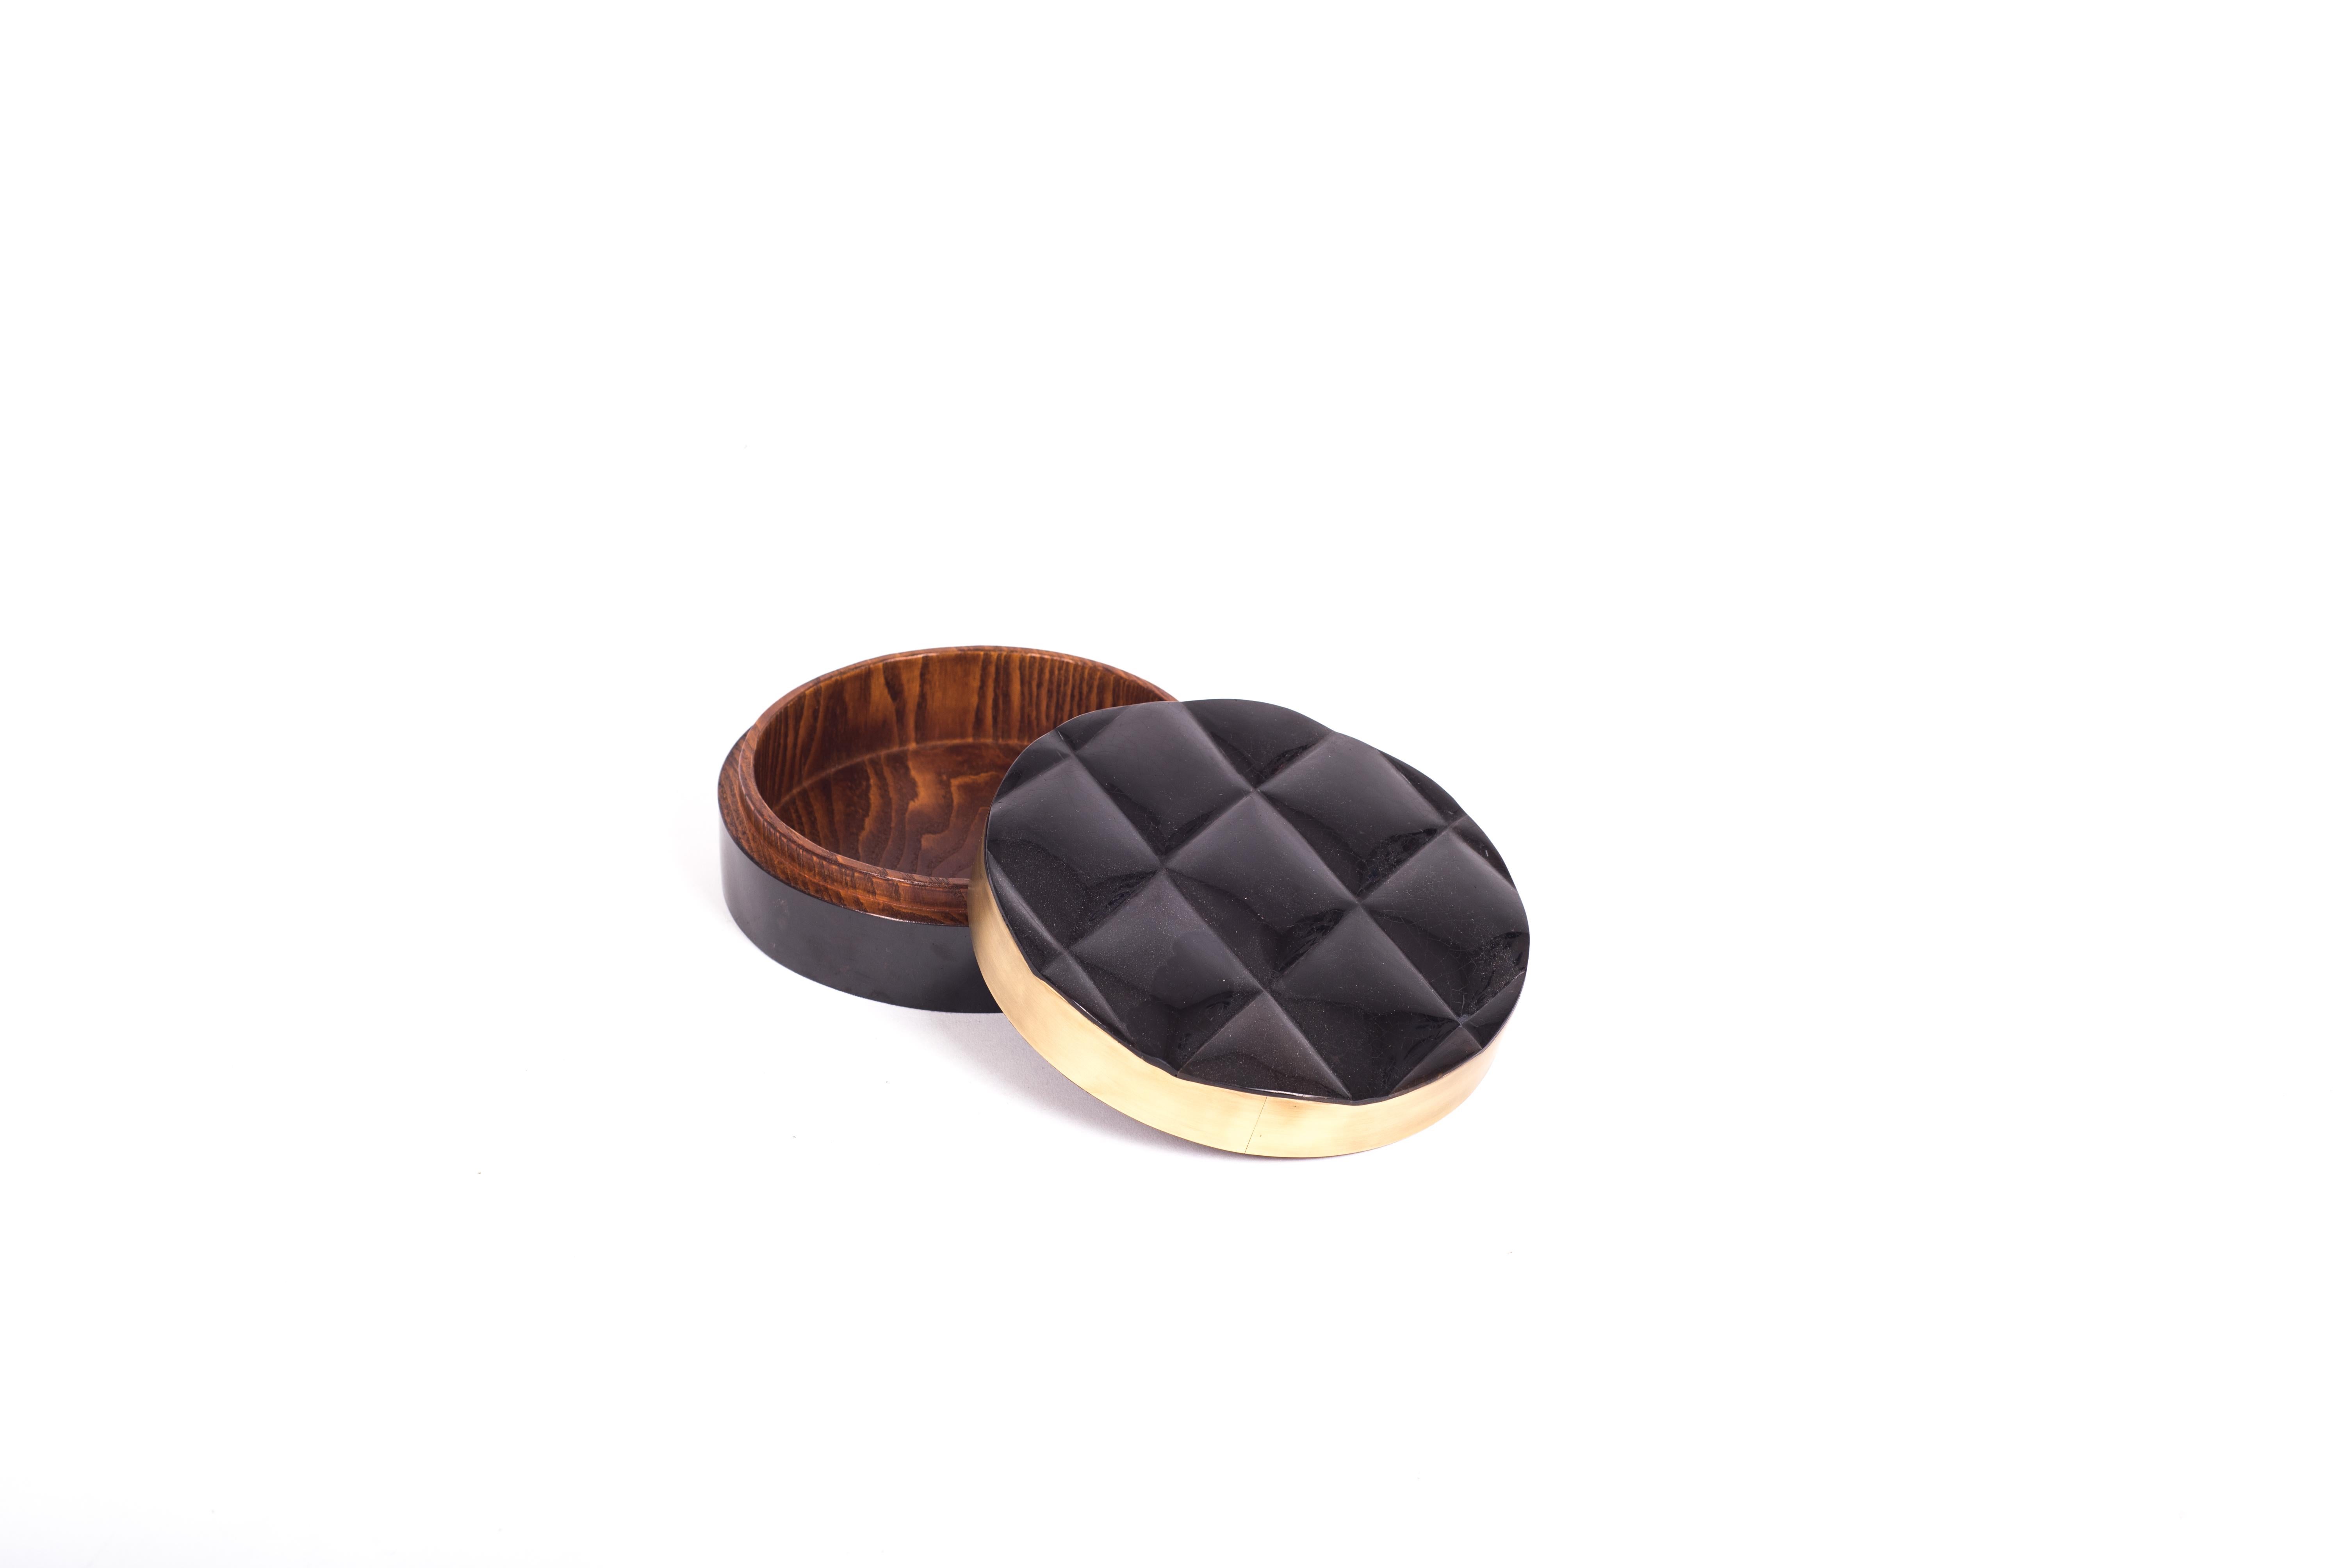 The Coco box is a sophisticated and luxurious accent piece with it’s exquisite quilted details. The exterior is inlaid in black pen shell with a bronze-patina brass frame and the interior is inlaid in gemelina wood. This listing is for the medium